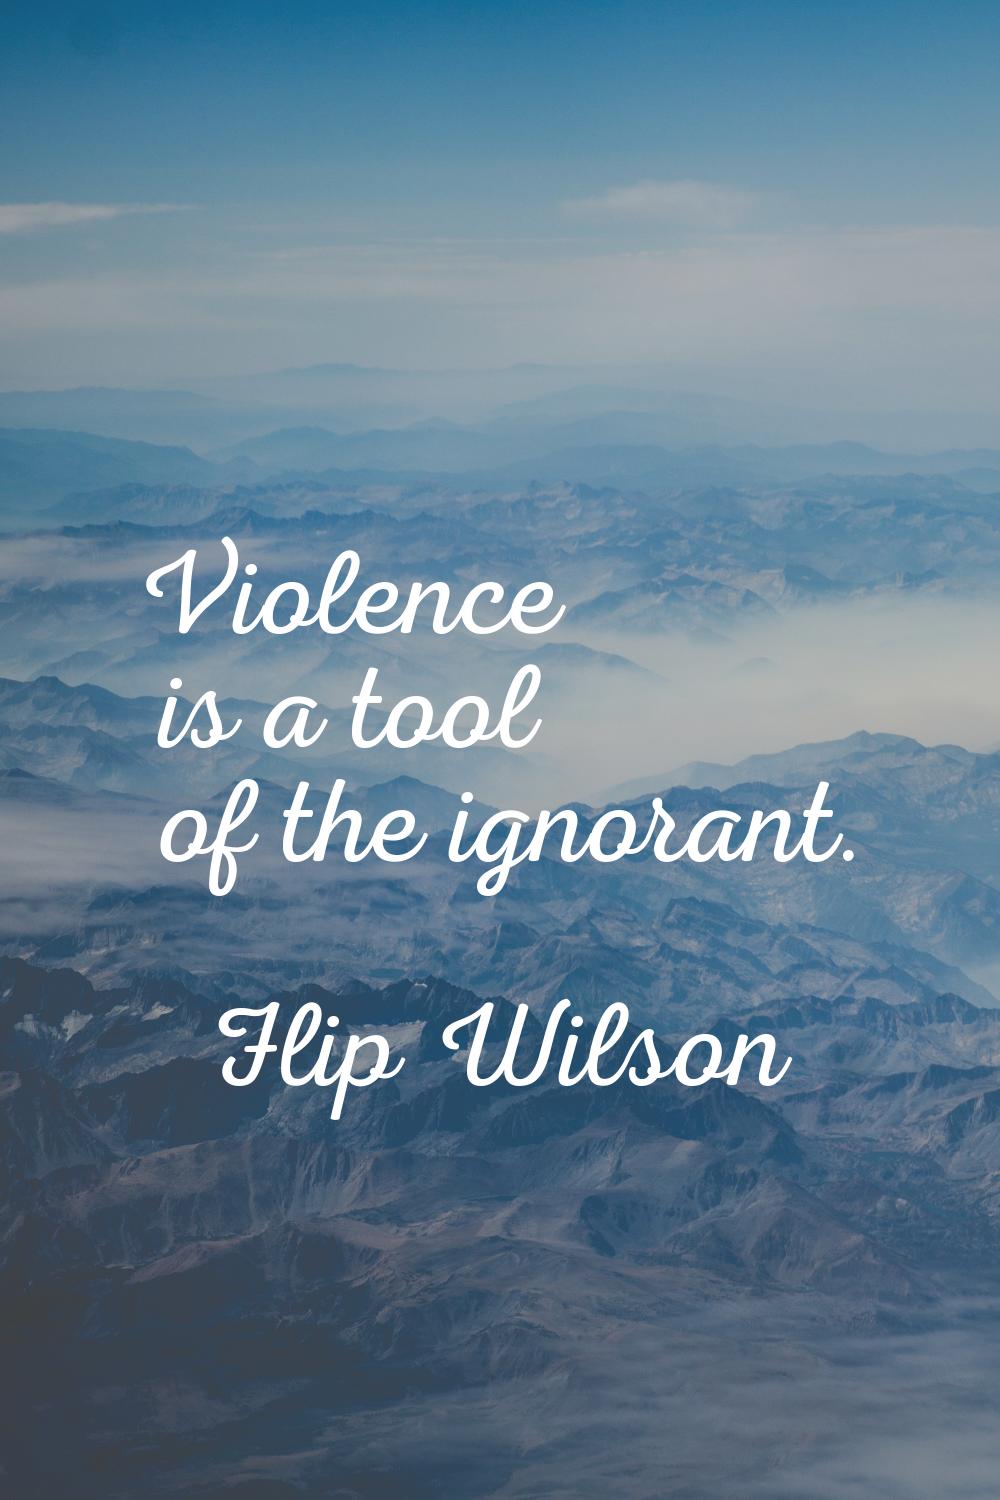 Violence is a tool of the ignorant.